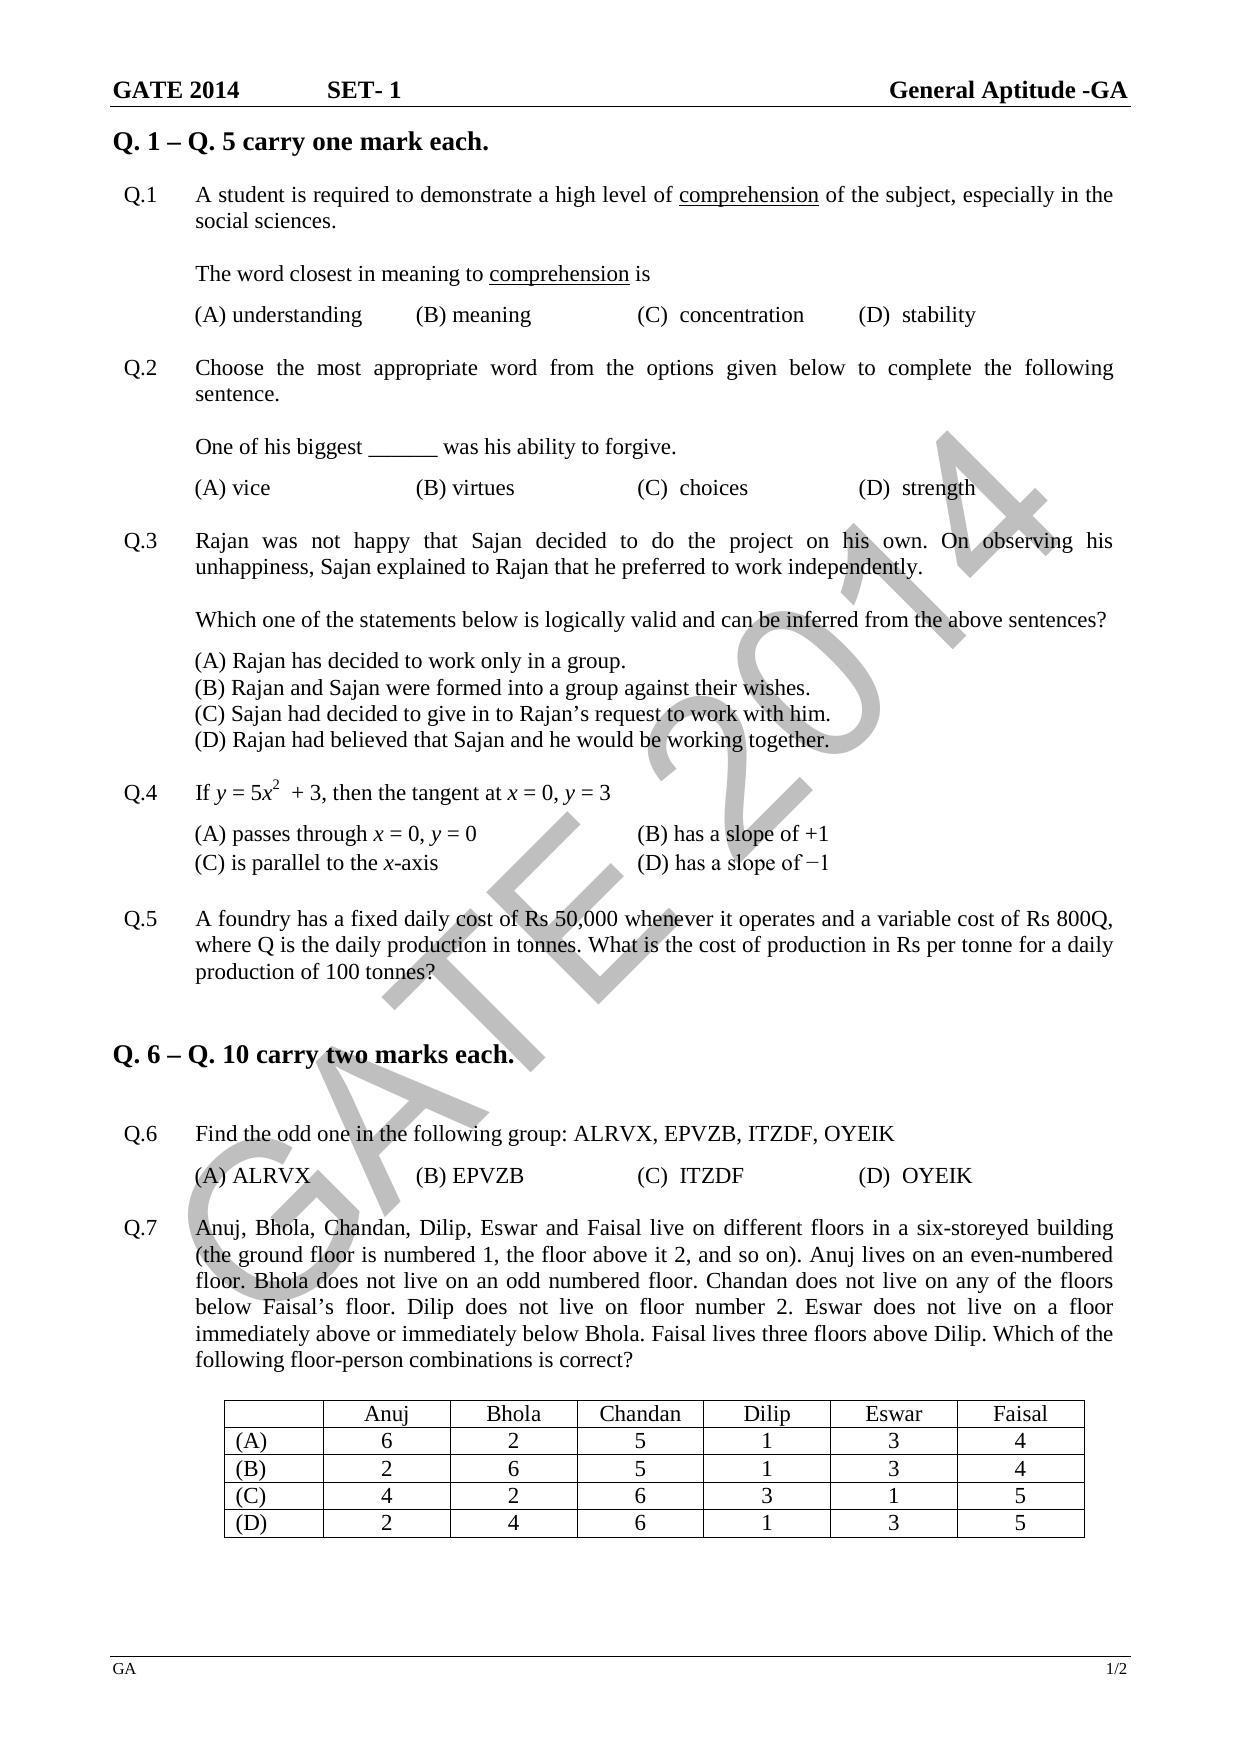 GATE 2014 Civil Engineering (CE) Question Paper with Answer Key - Page 6